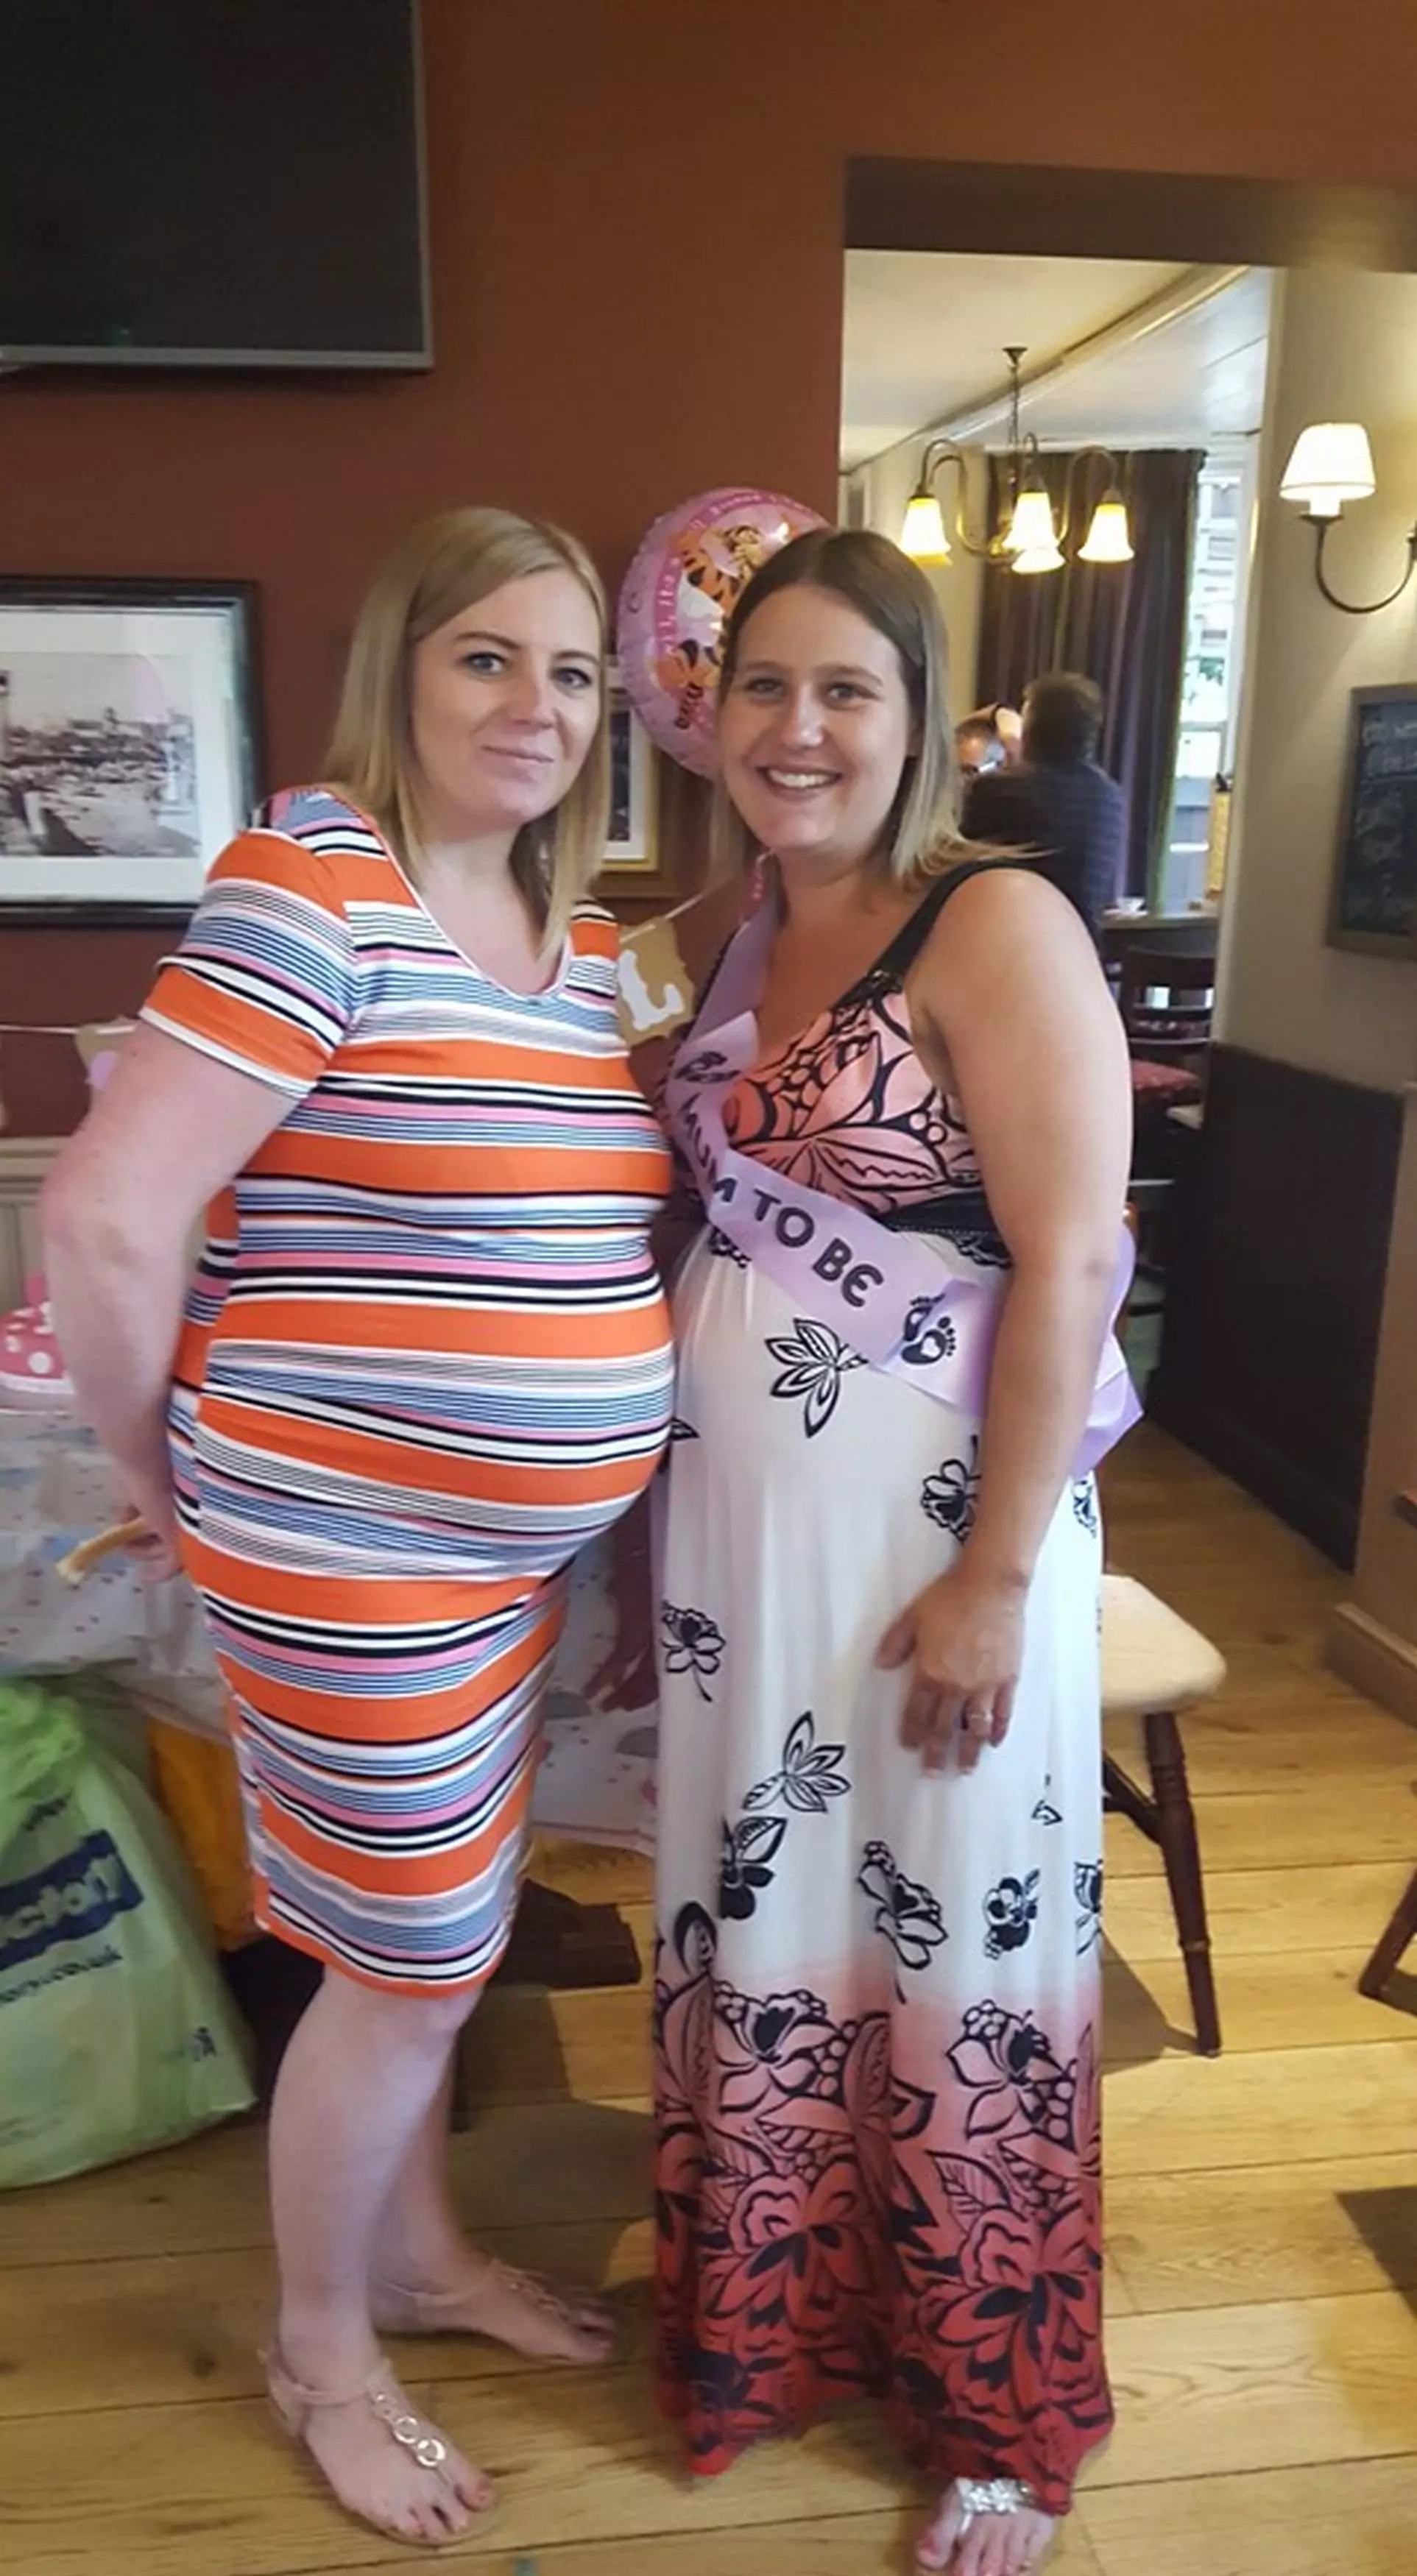 Grace (left) showing off her previous pregnancy bump when she was expecting Blake.